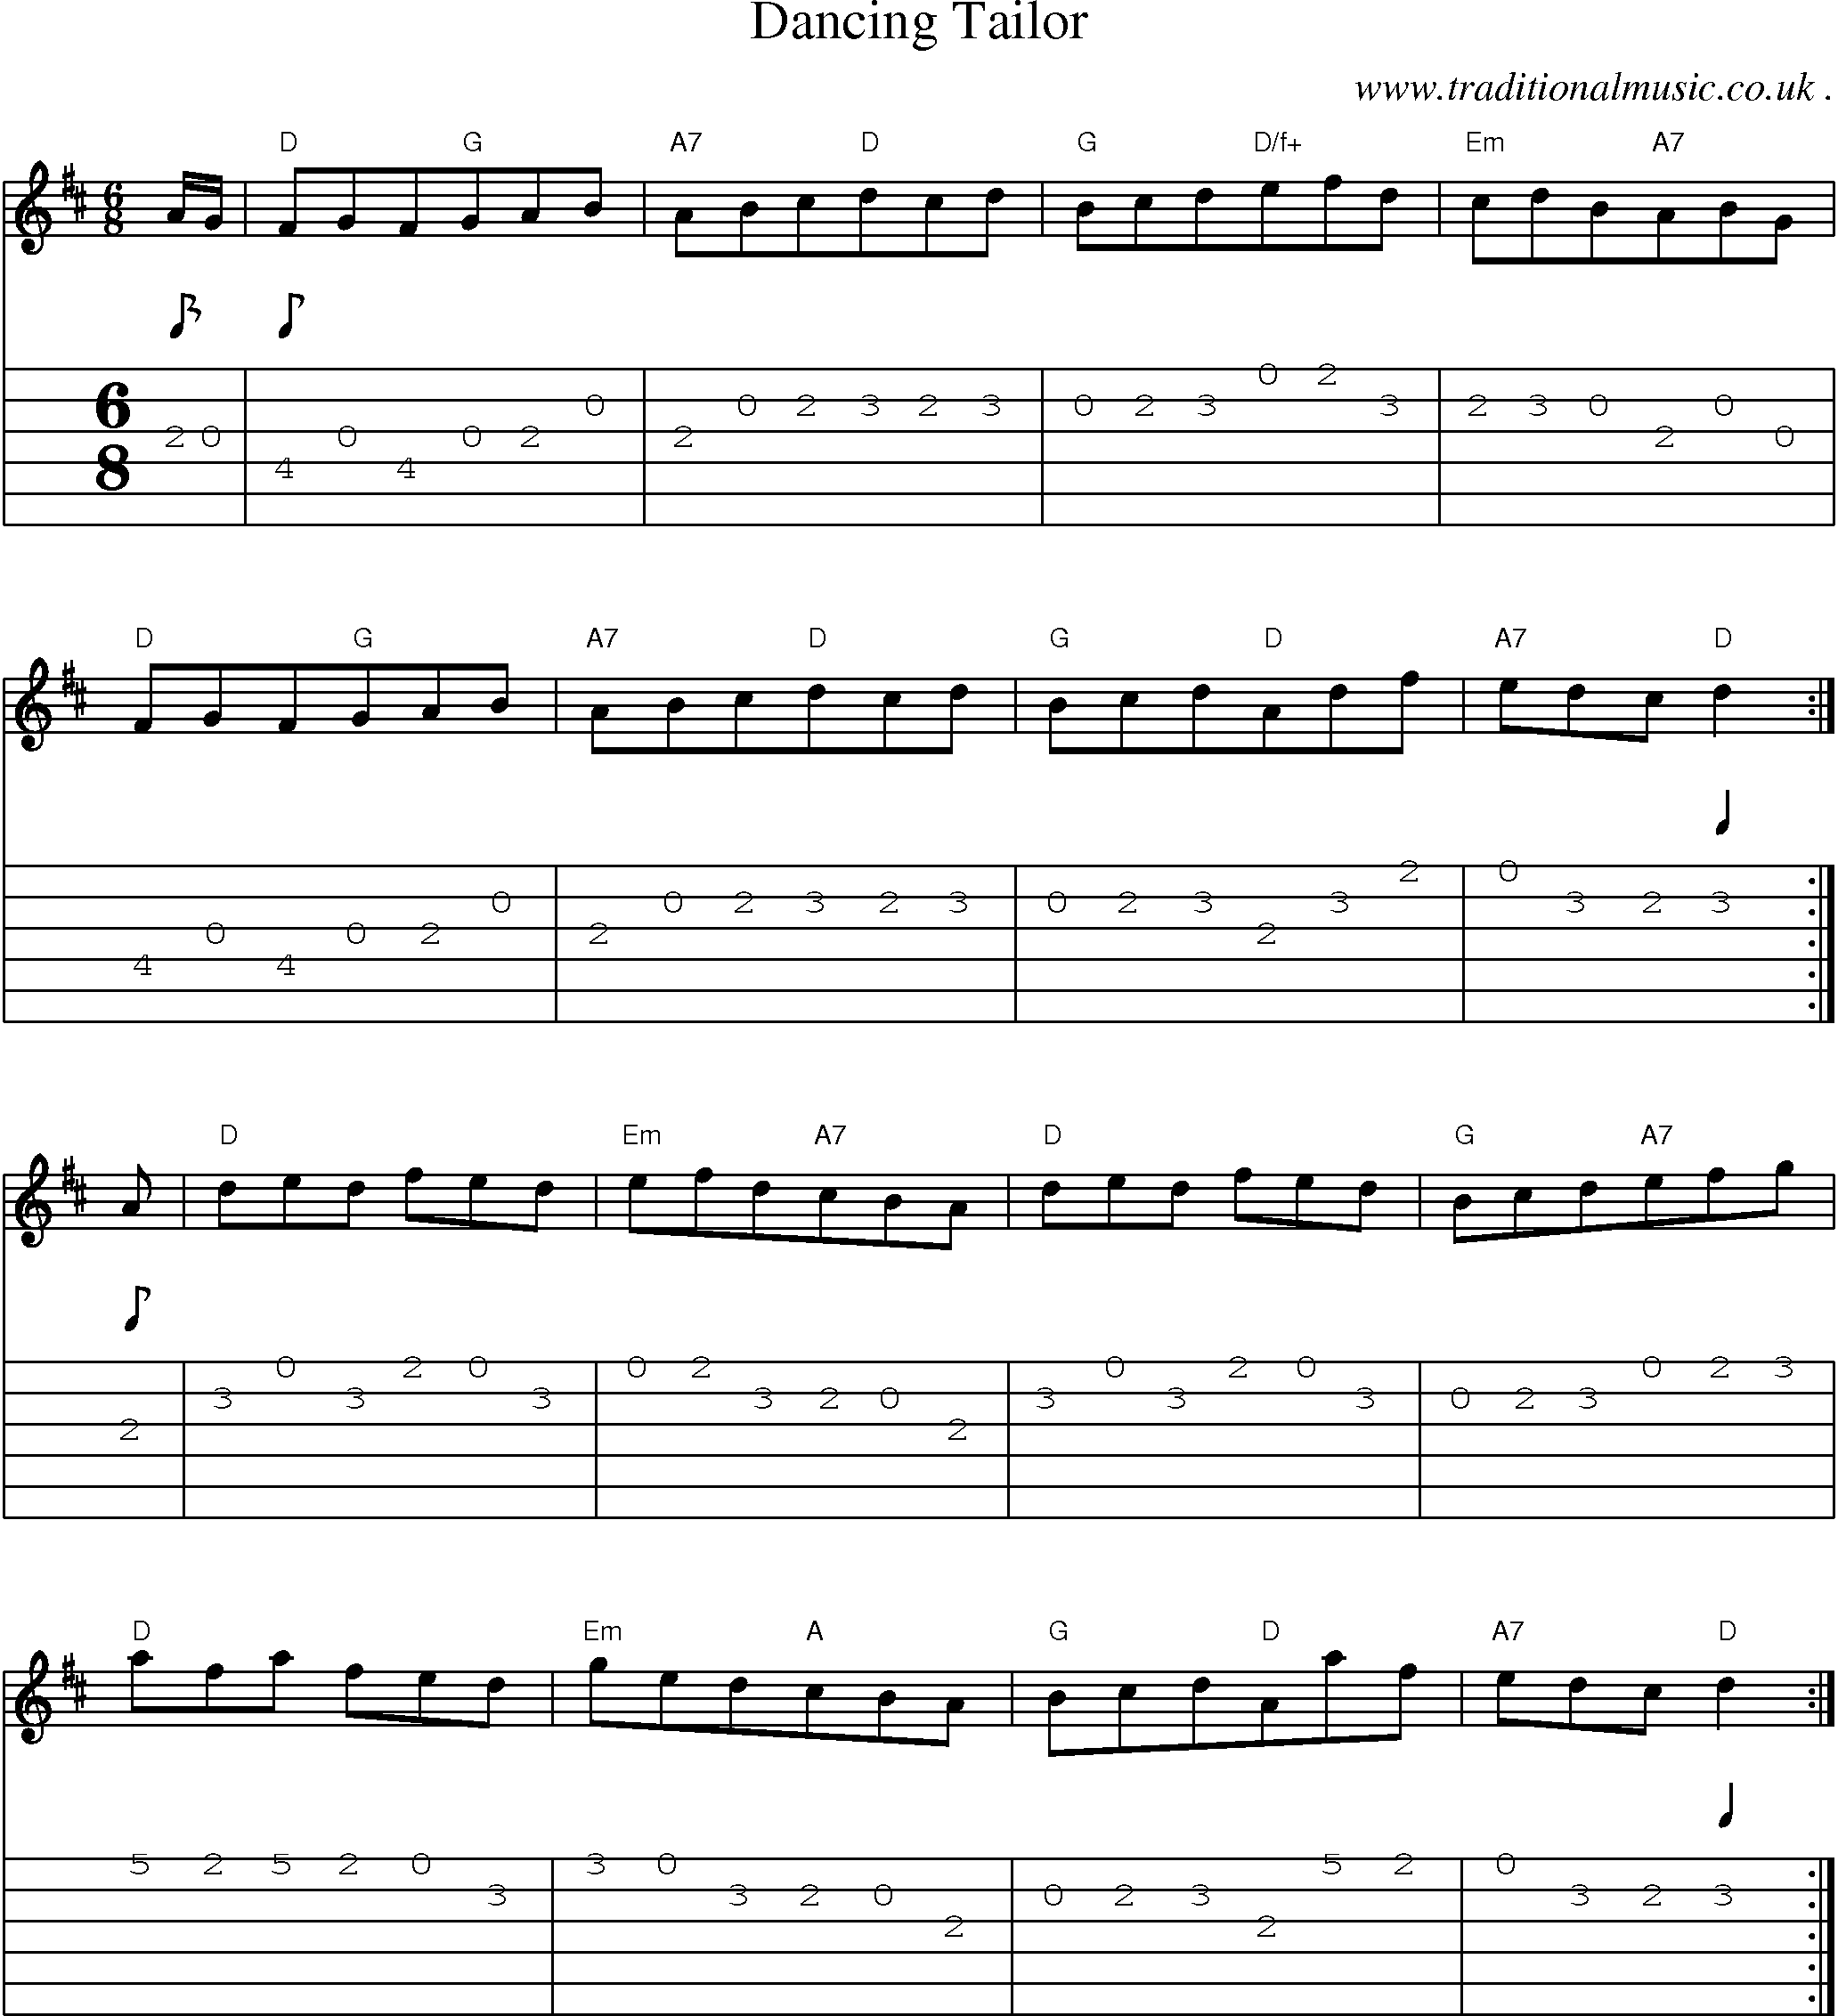 Sheet-Music and Guitar Tabs for Dancing Tailor